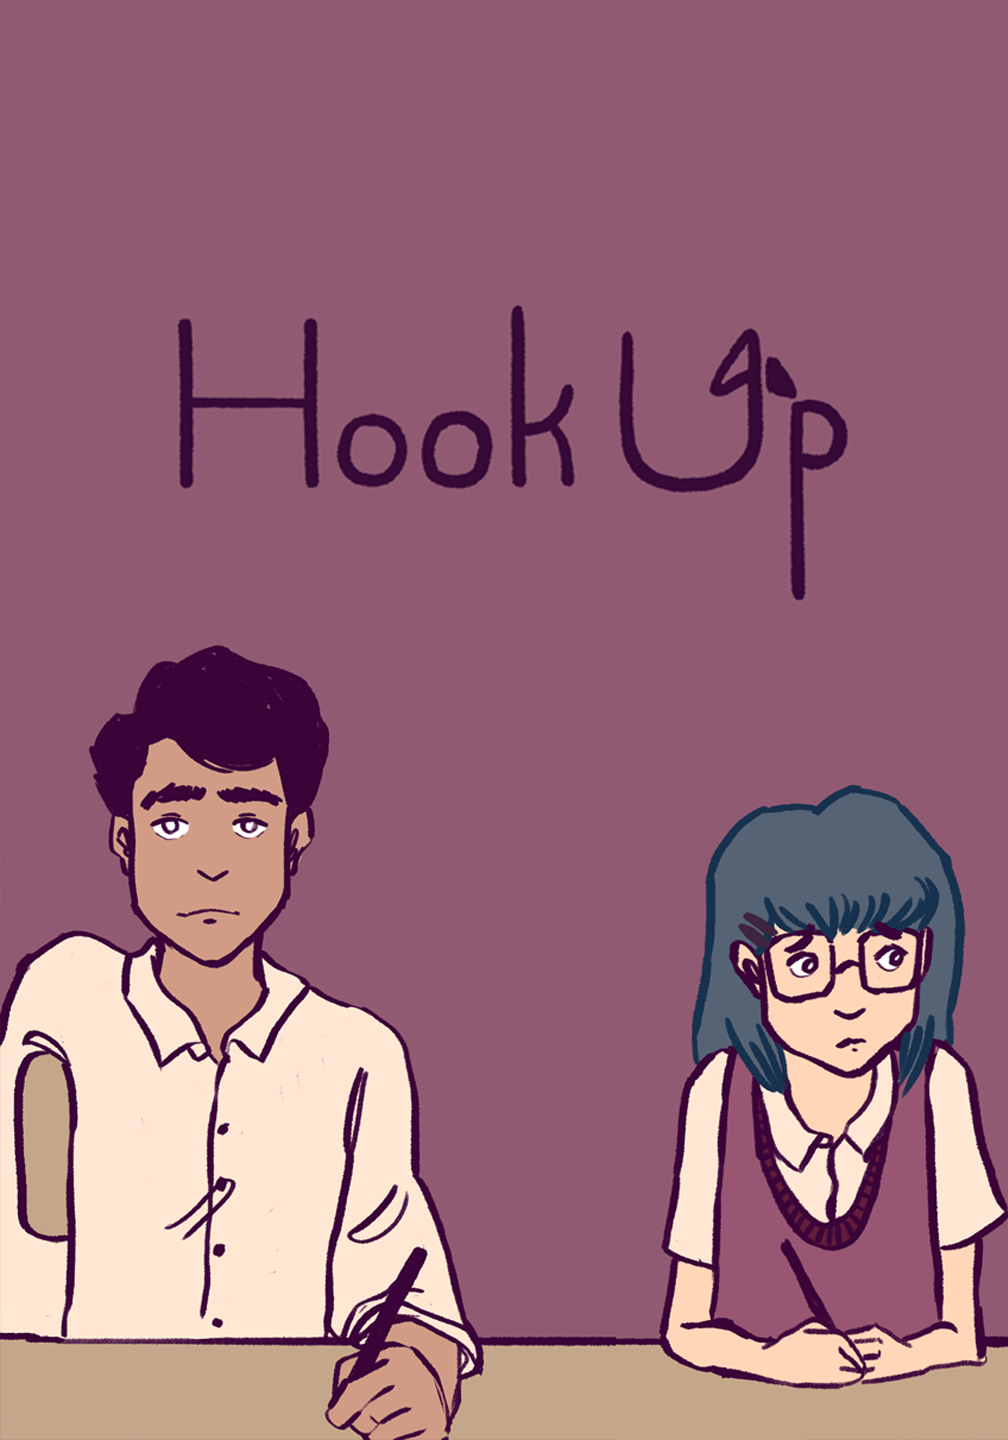 Hook Up the game poster, showing two illustrated people